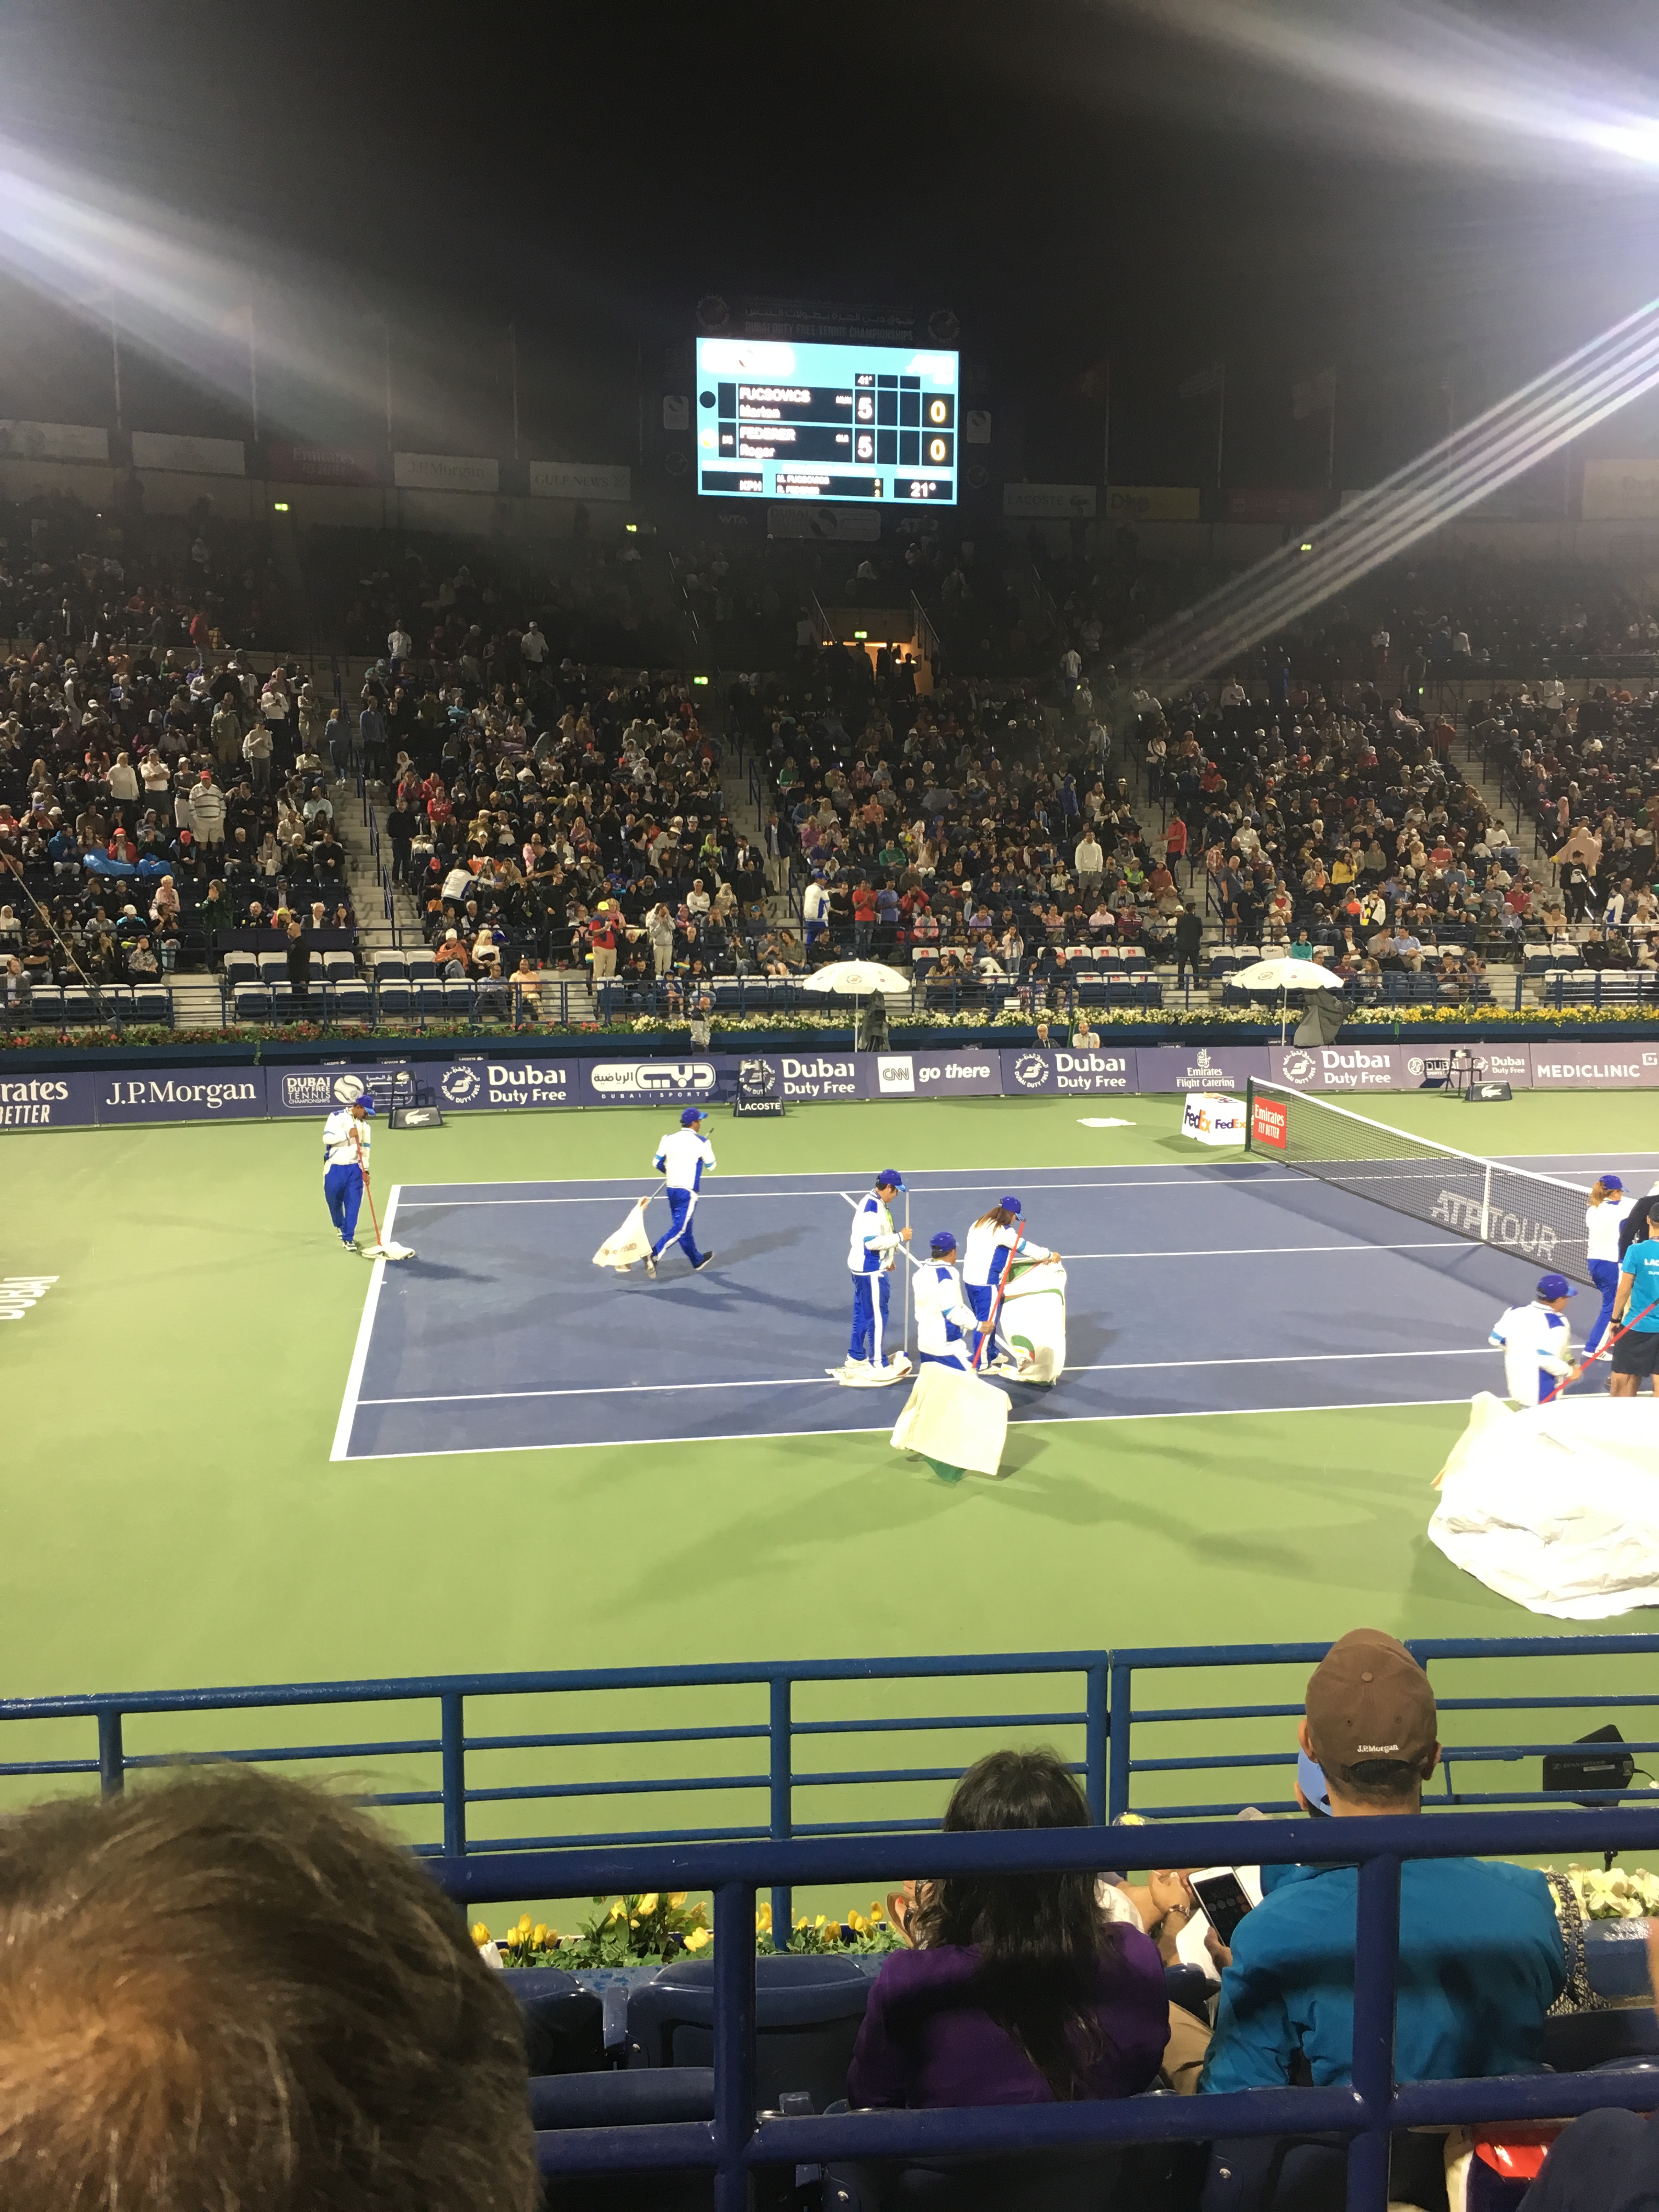 A (not-so-quick) guide to the Dubai Duty Free Tennis championships